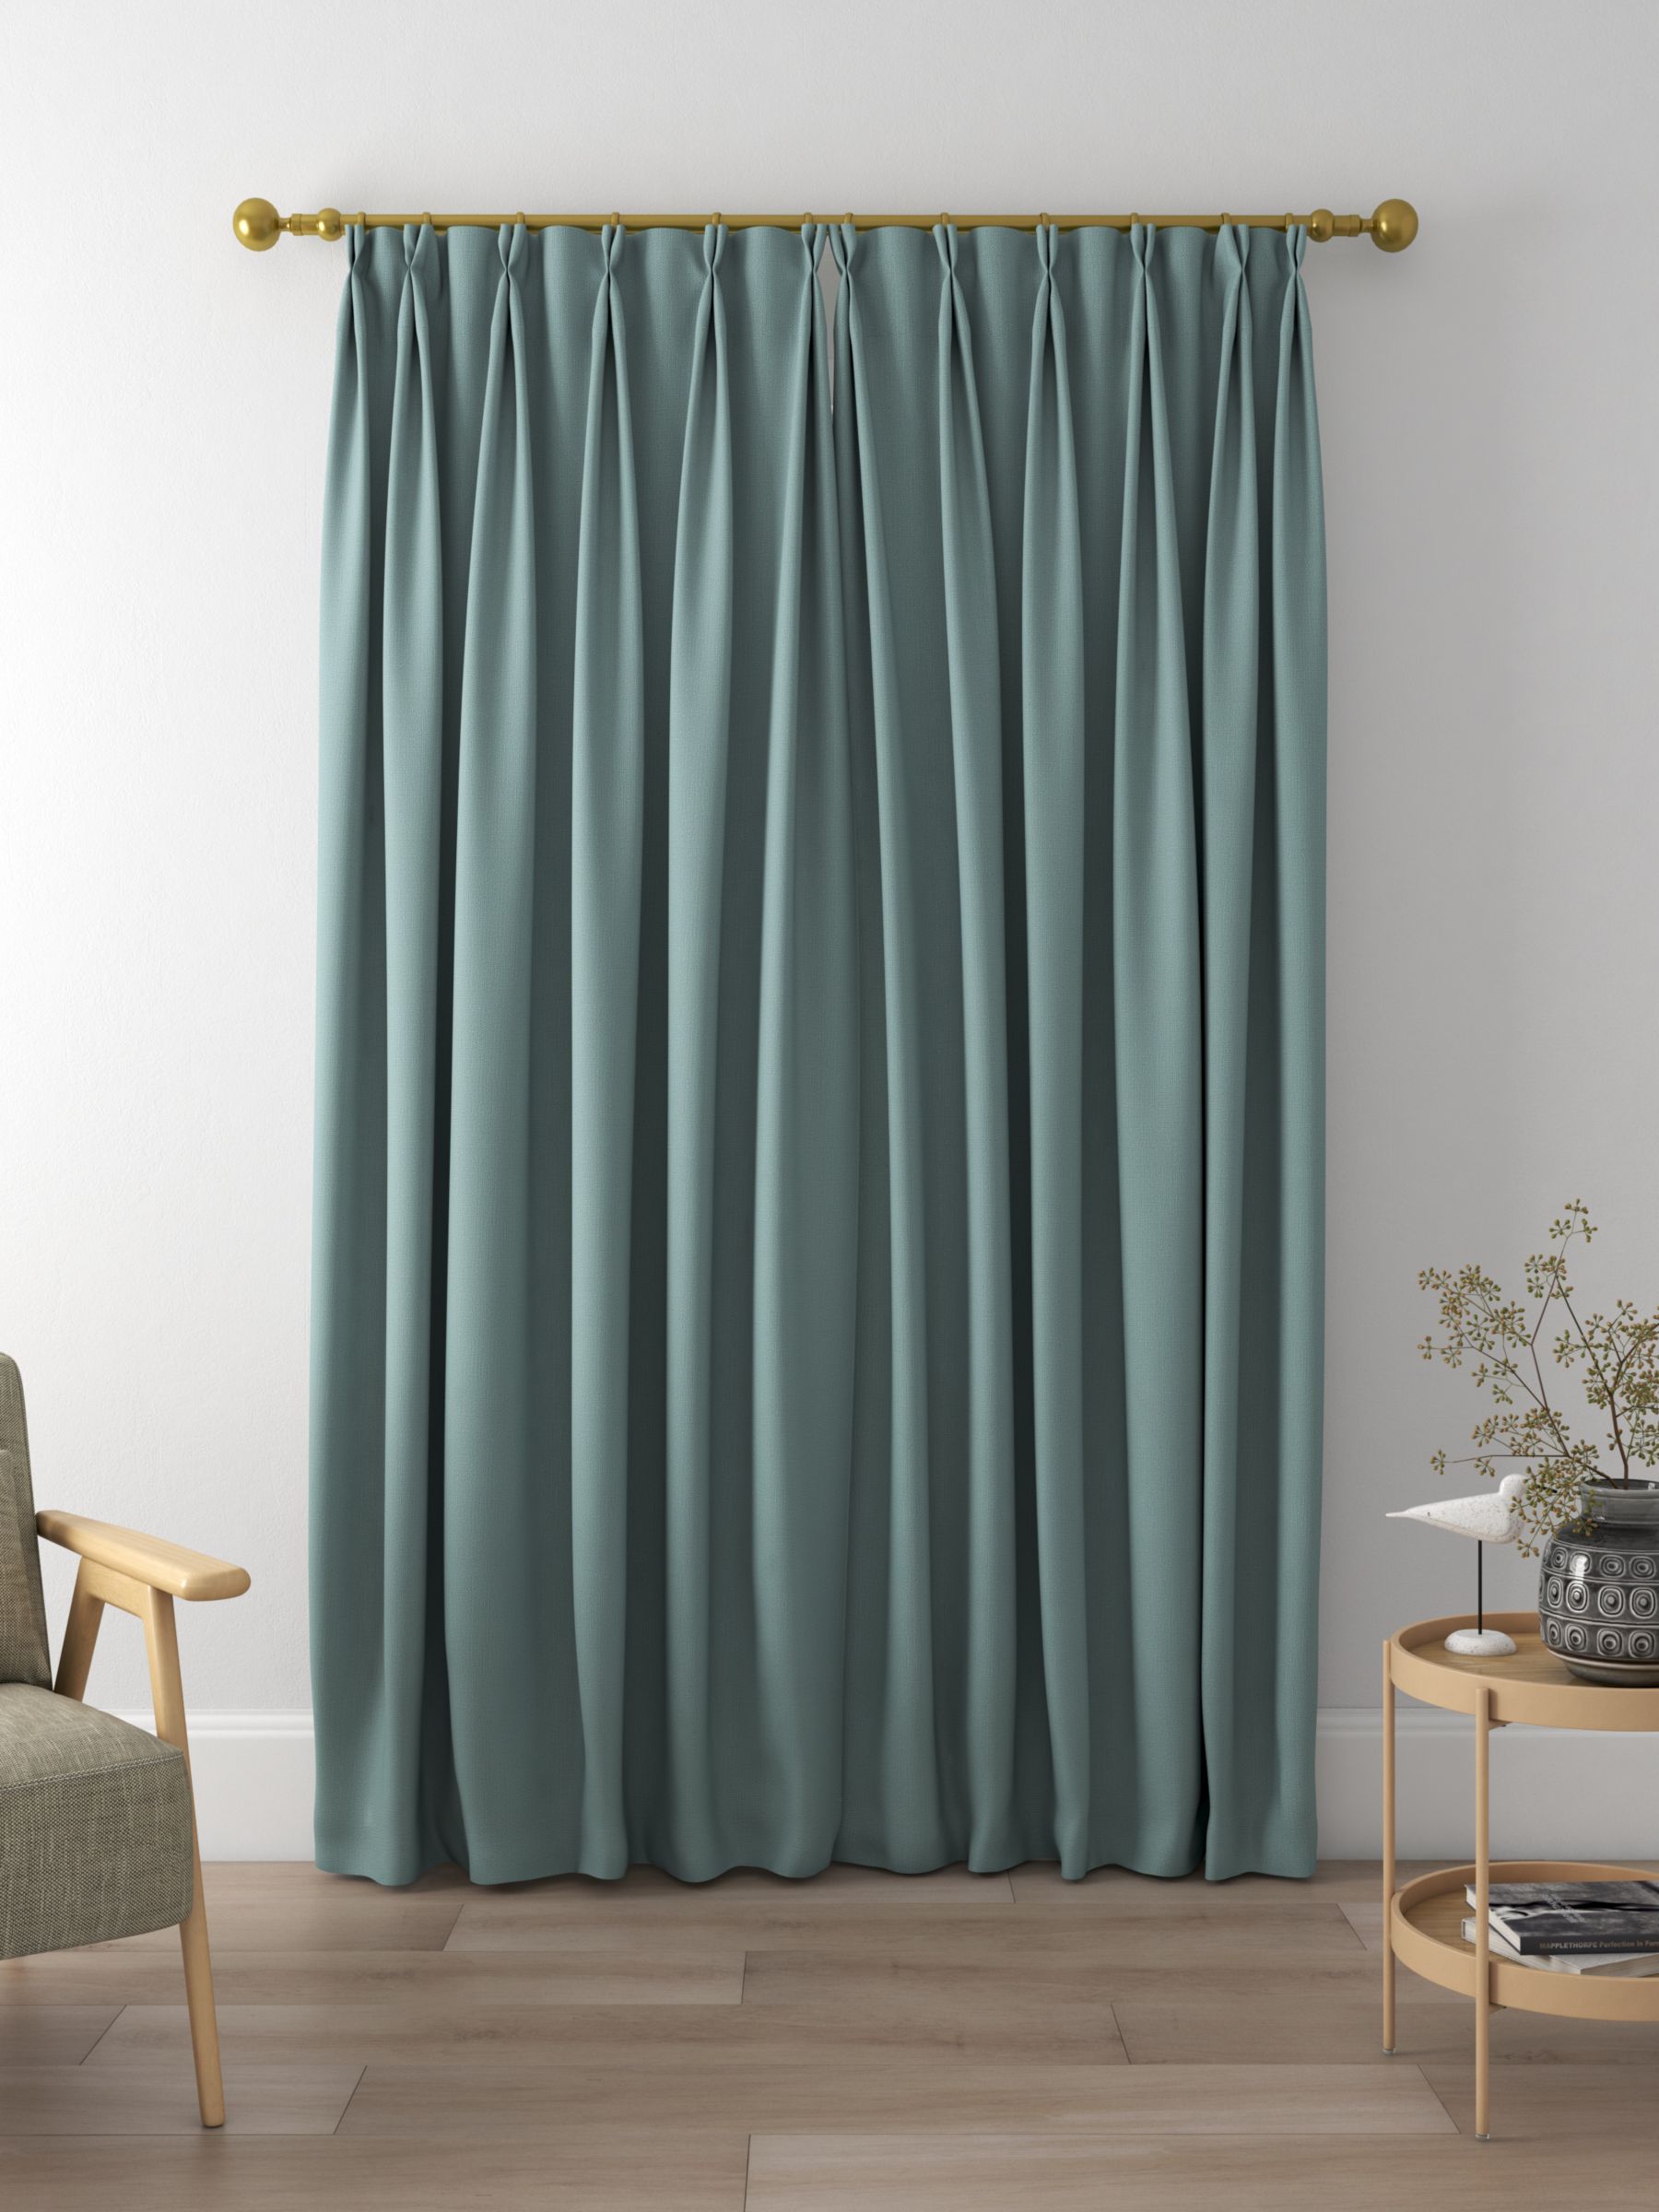 Sanderson Tuscany II Made to Measure Curtains, Soft Teal